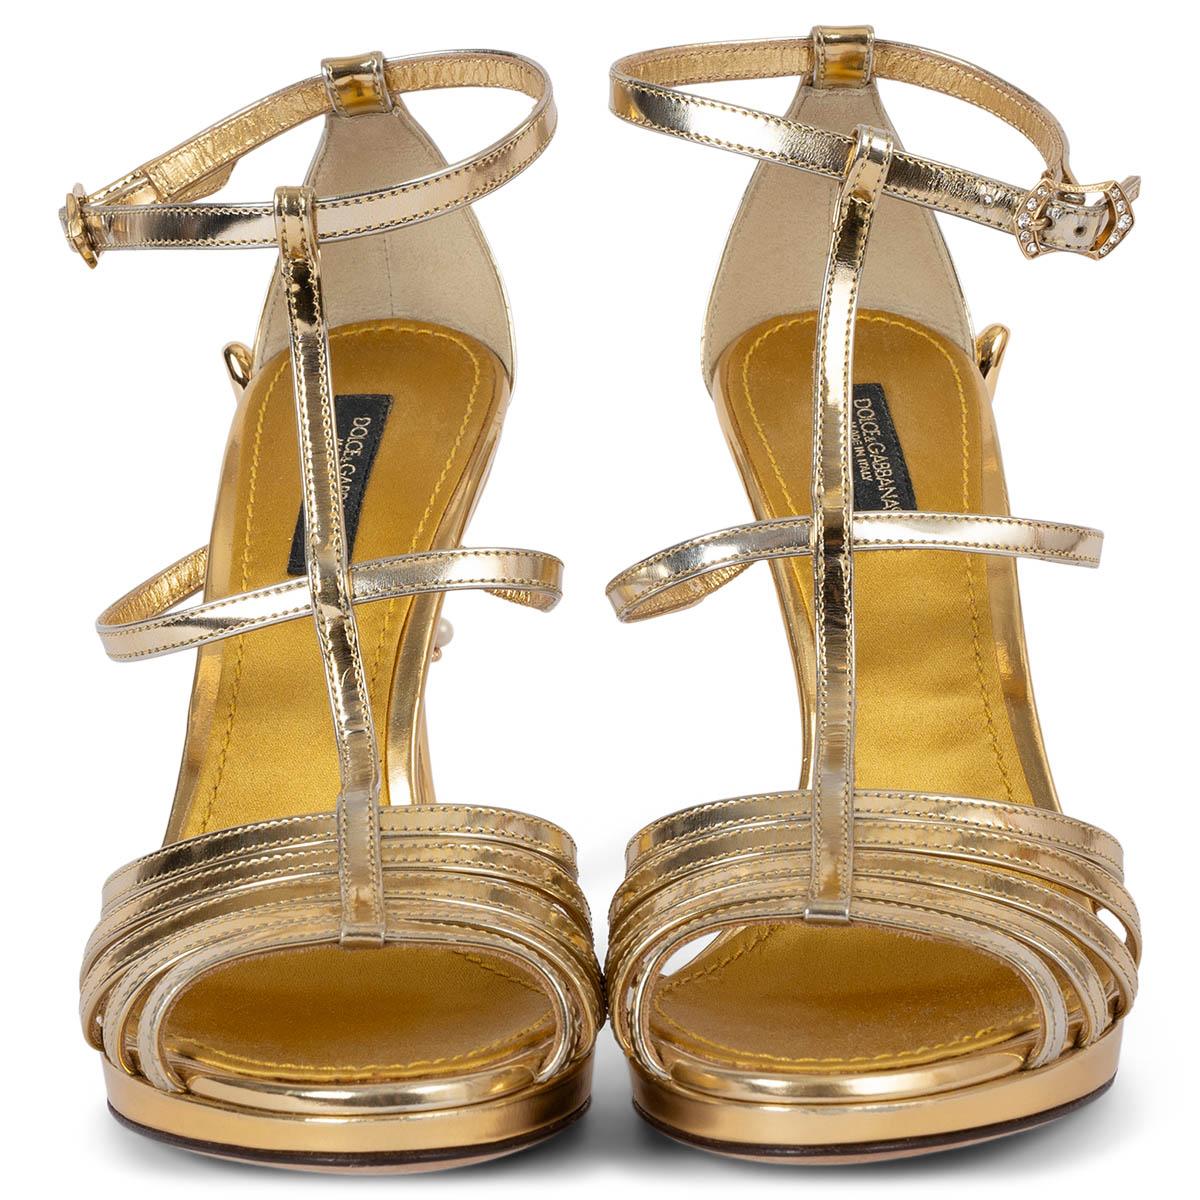 100% authentic Dolce & Gabbana gold patent leather t-strap sandals with gold-tone hardware, gold acetate 